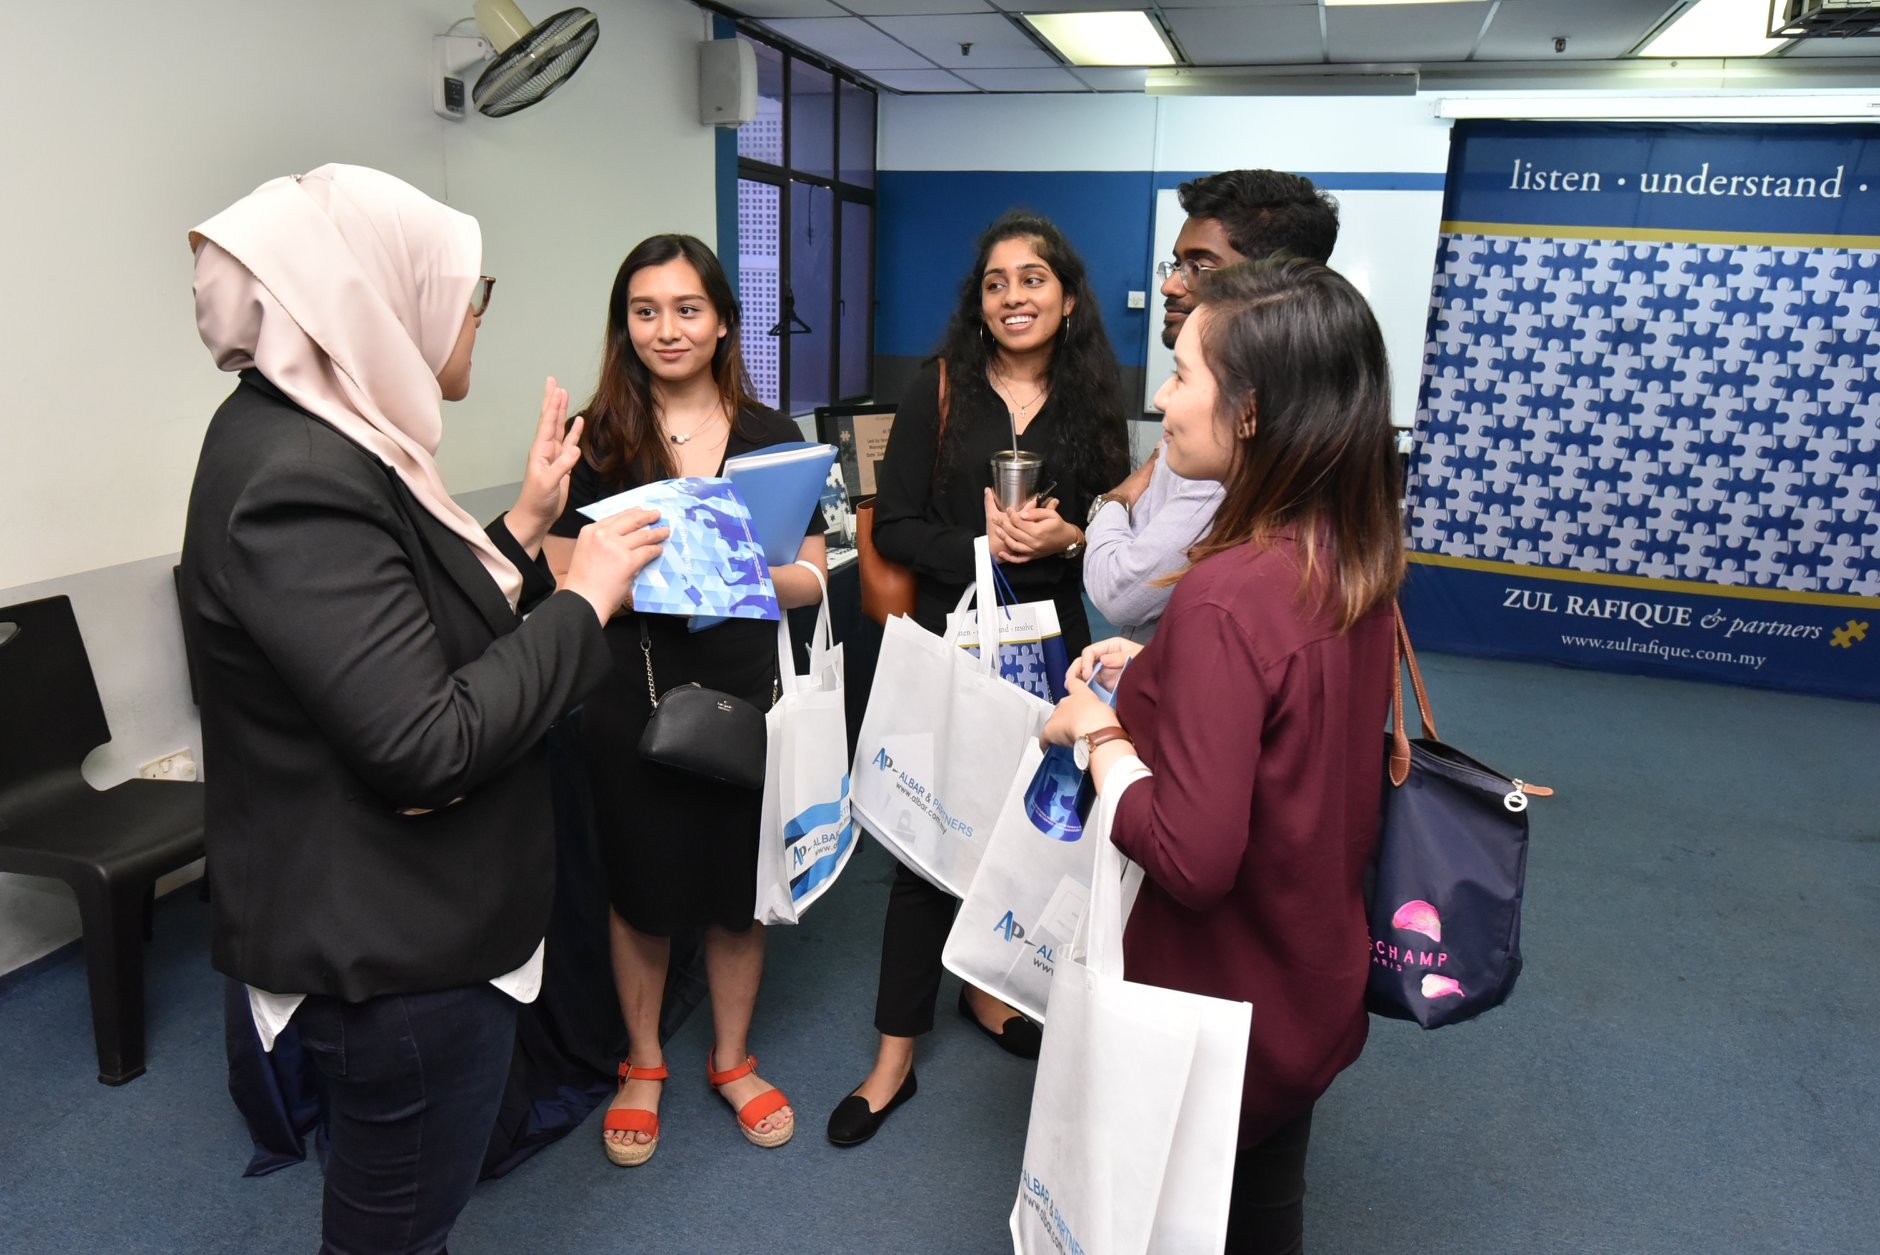 ATC students have many opportunities to connect with the legal industry.